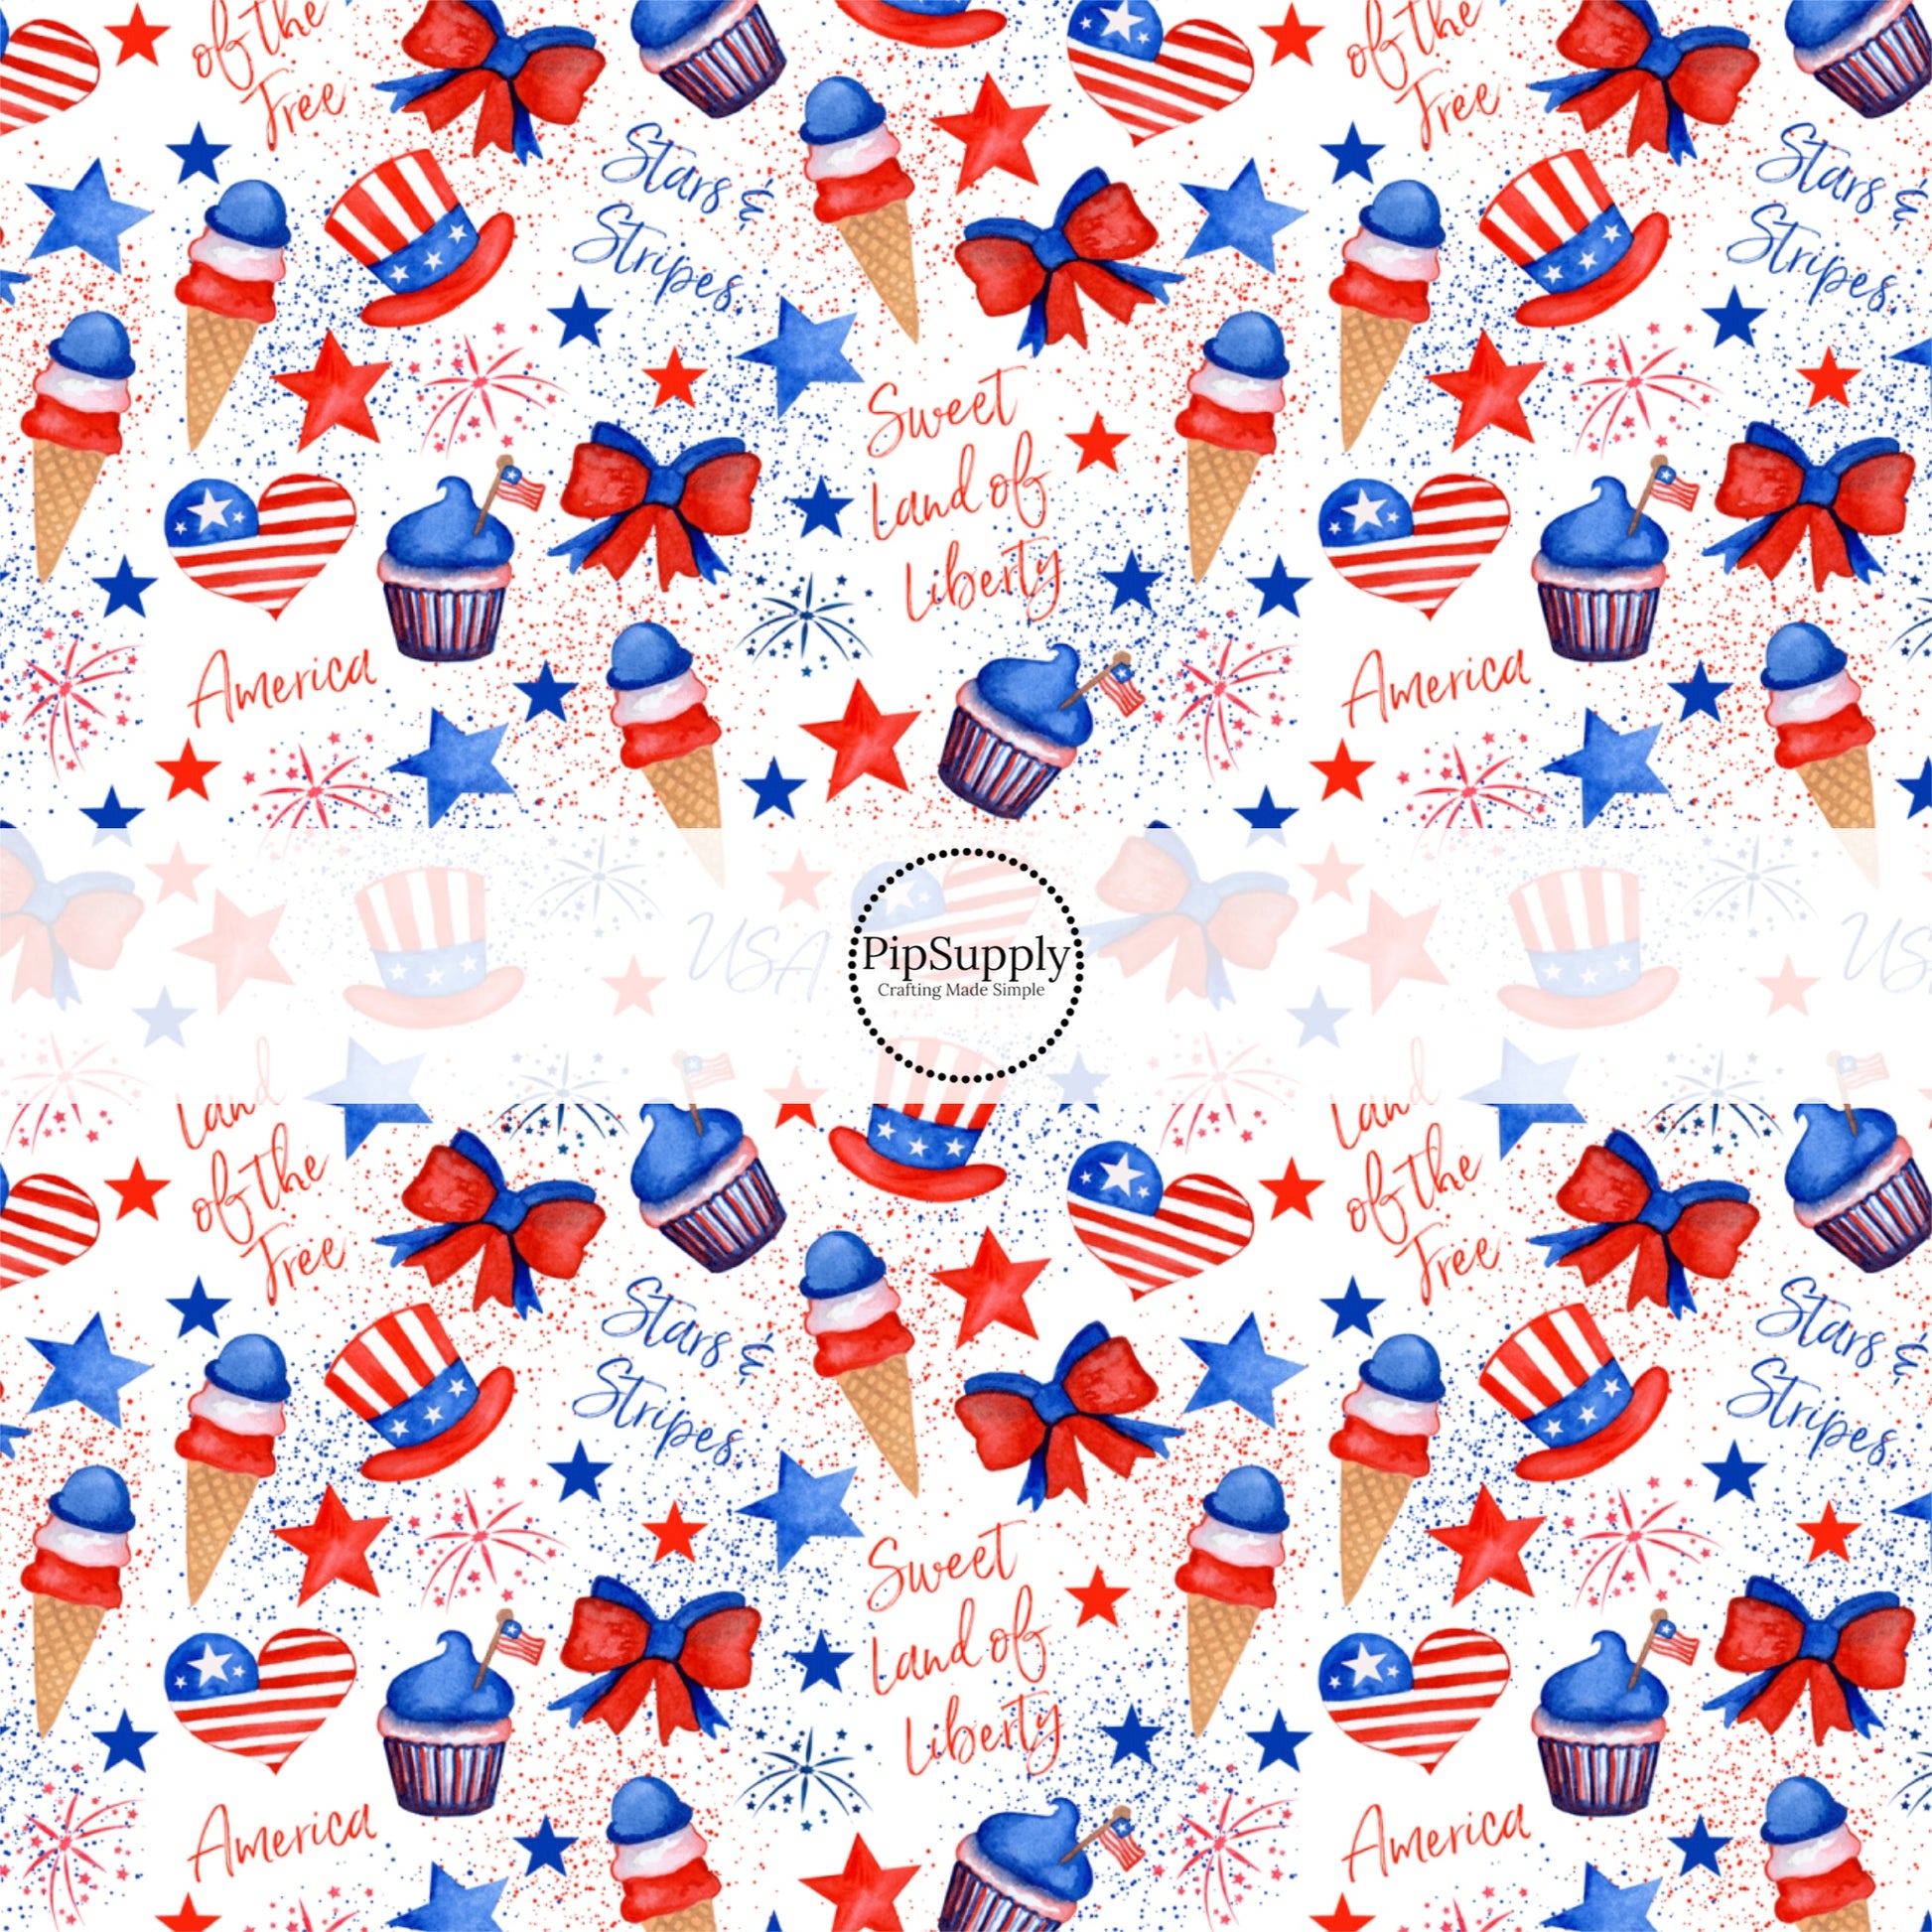 White fabric by the yard with fireworks, patriotic things, desserts, and stars.